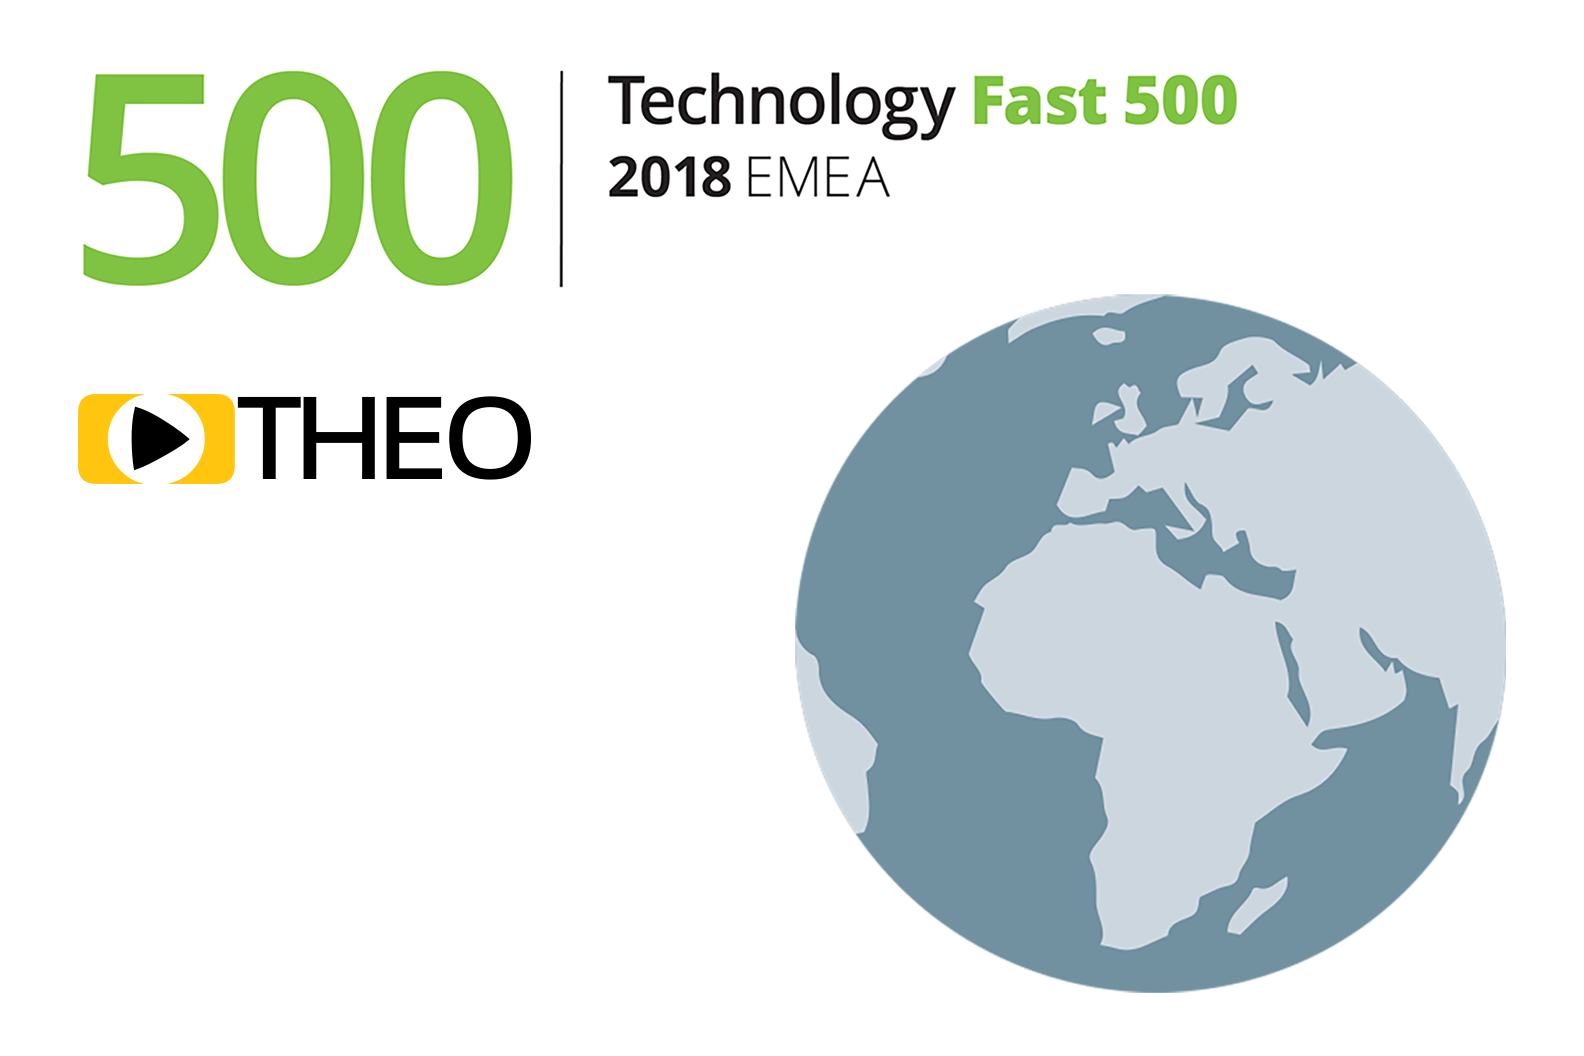 THEO Technologies ranked 47 fastest-growing company in the Deloitte 2018 Technology Fast 500 EMEA List.